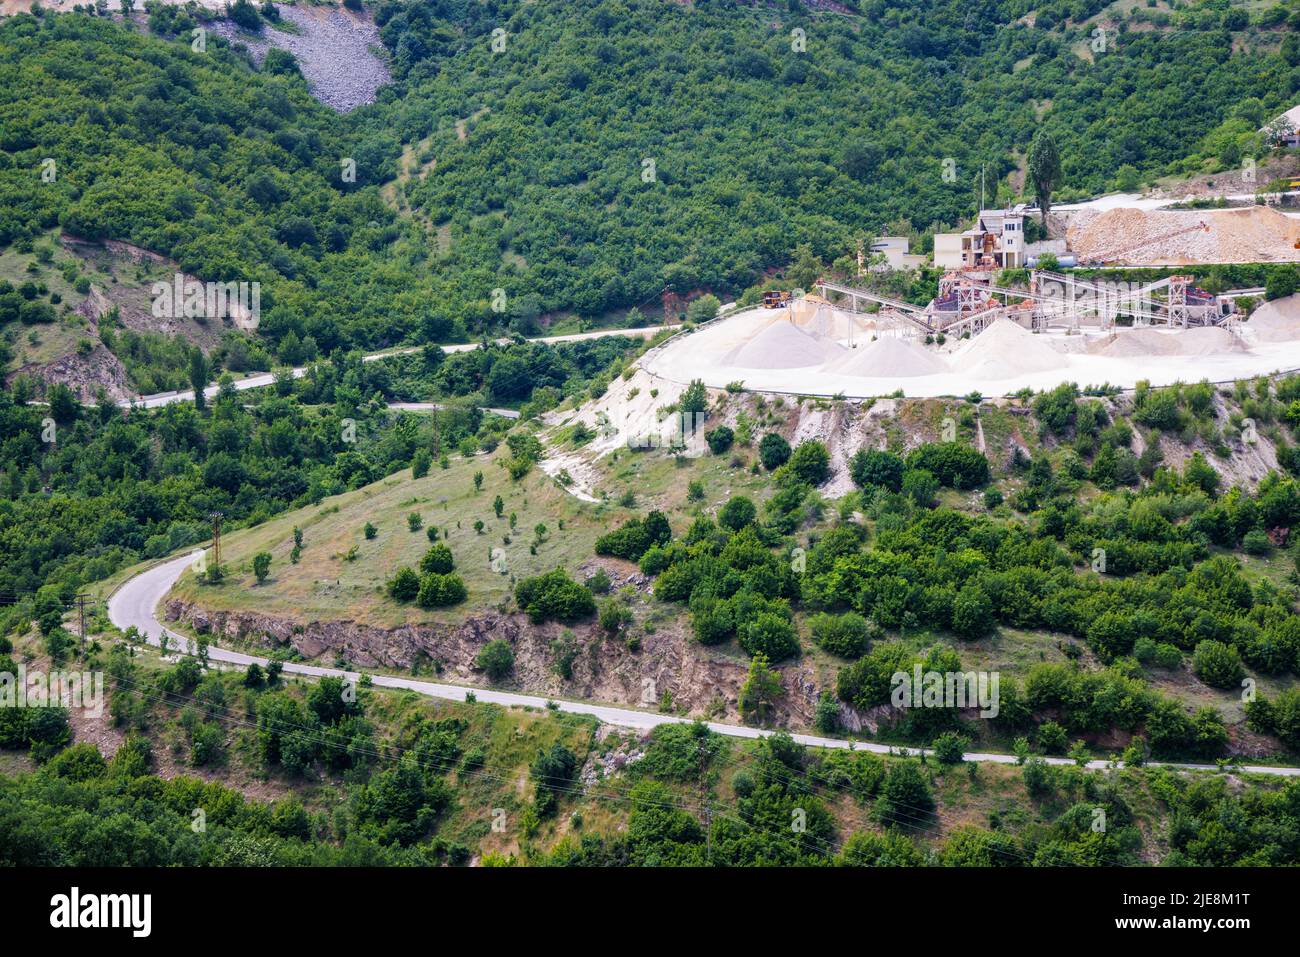 A natural stepped quarry rich in minerals is located near winding intermountain road, against backdrop of Rhodope Mountains and hills with extensive e Stock Photo